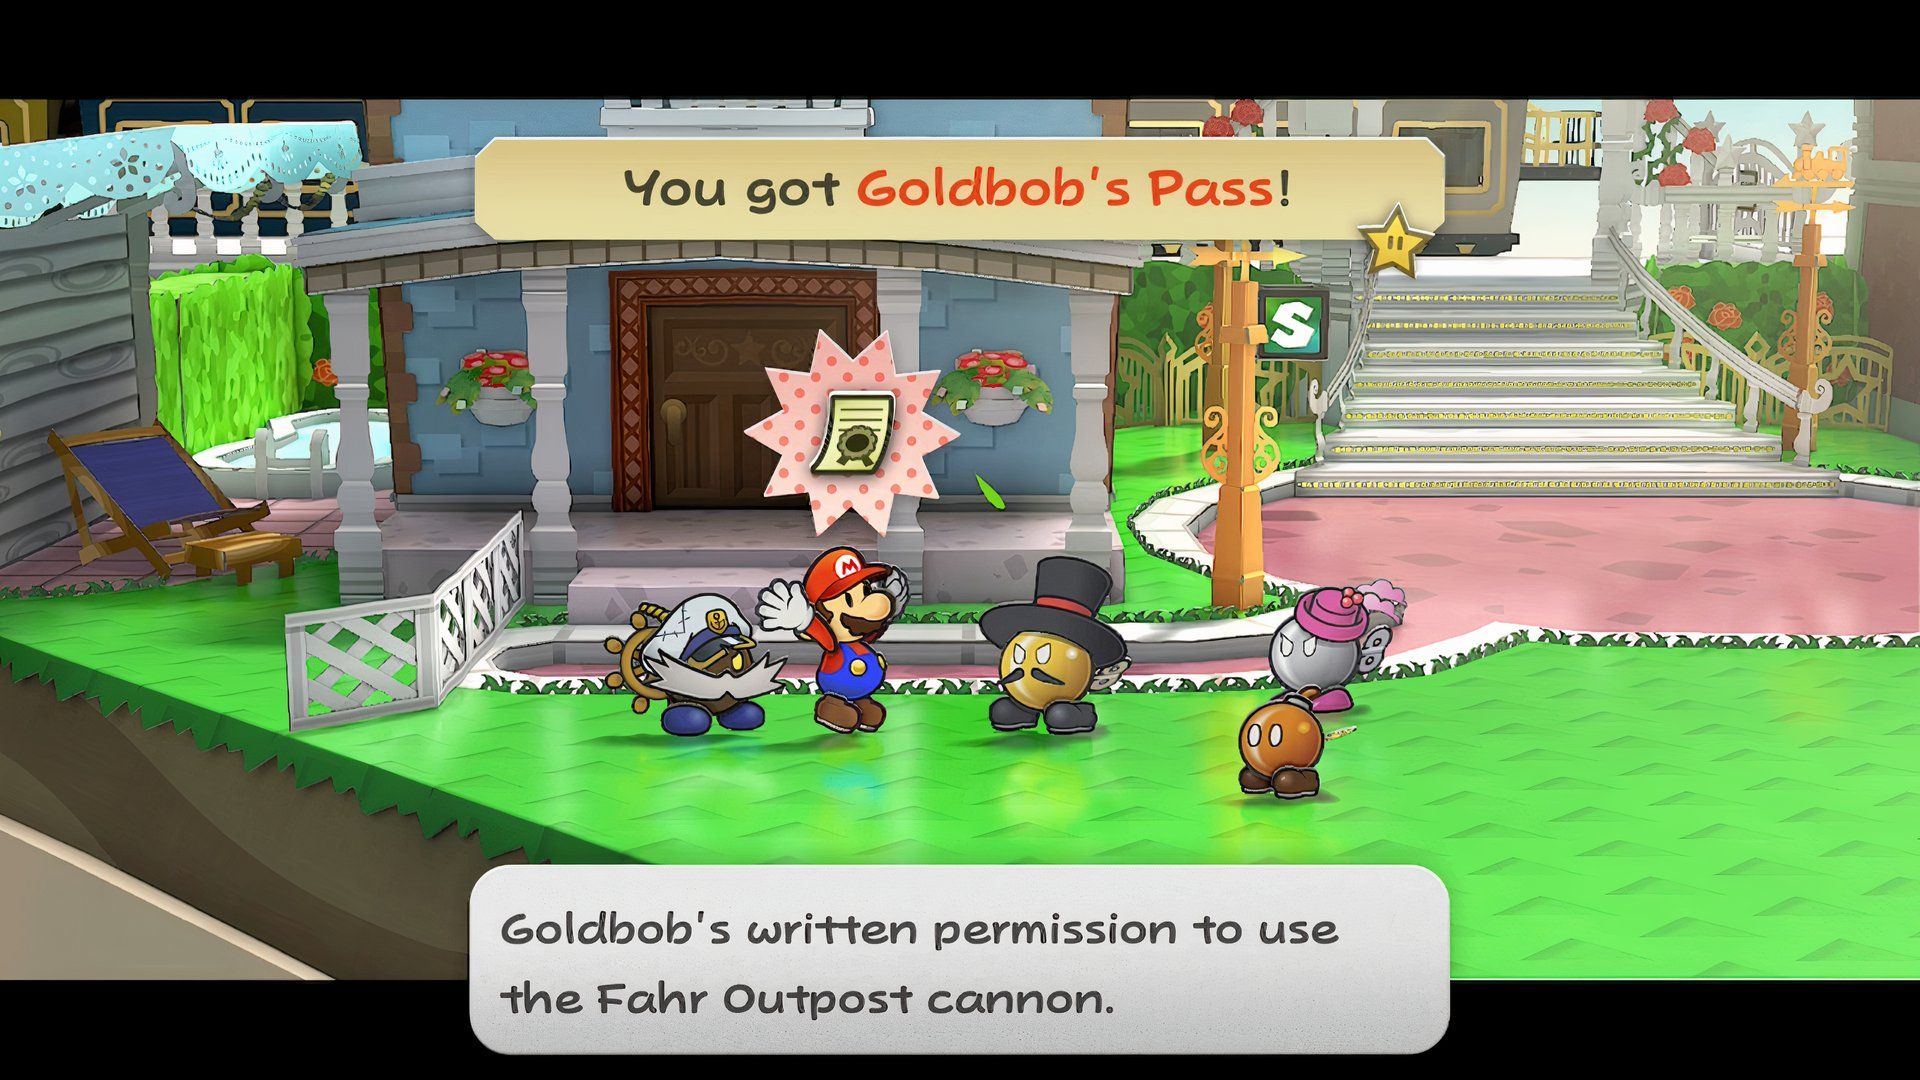 Paper Mario: The Thousand-Year Door - Goldbob's Pass for Fahr Outpost Cannon